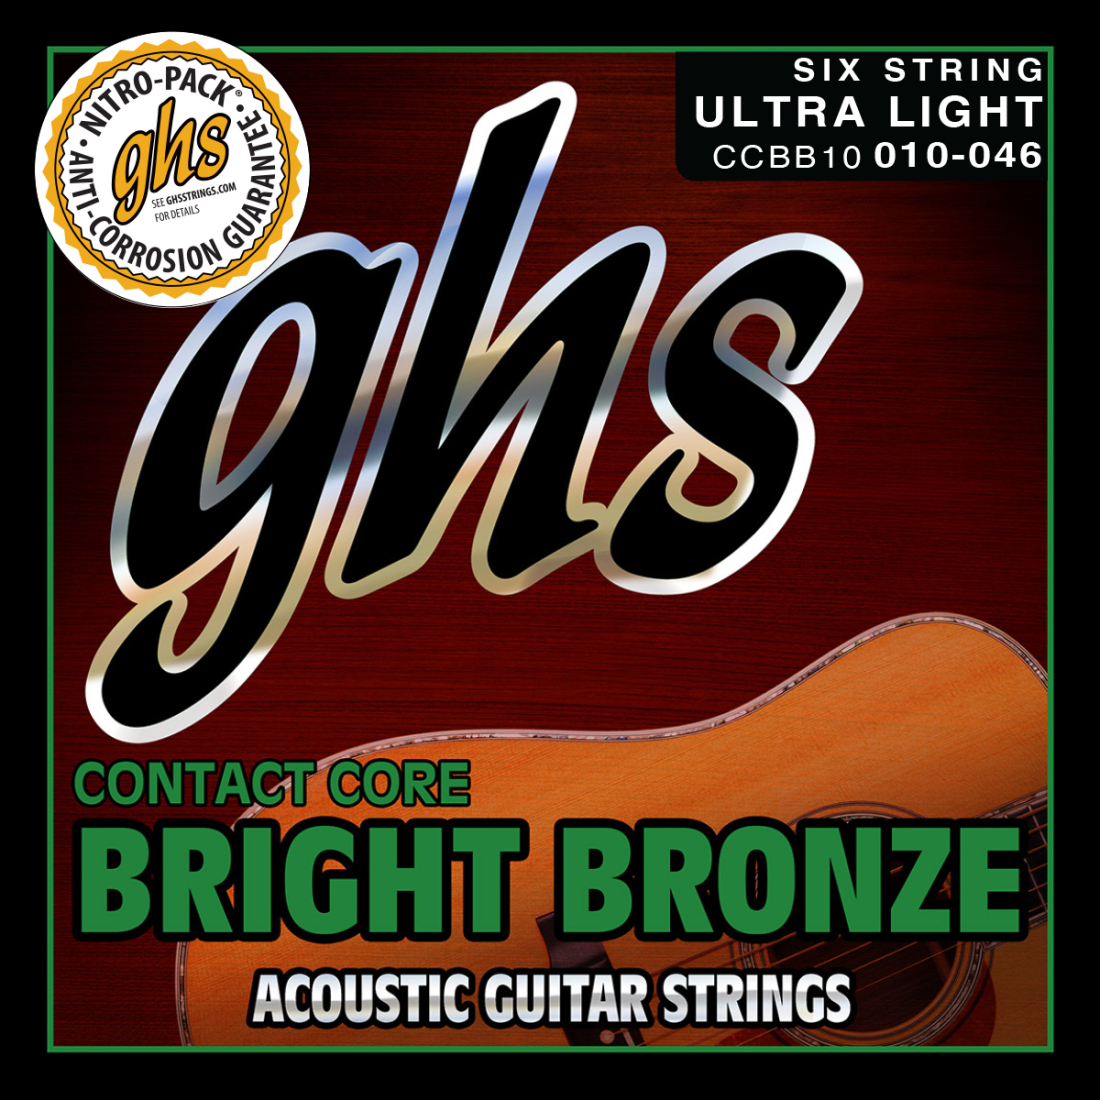 Contact Core Bright Bronze Acoustic Guitar Strings - Ultra Light